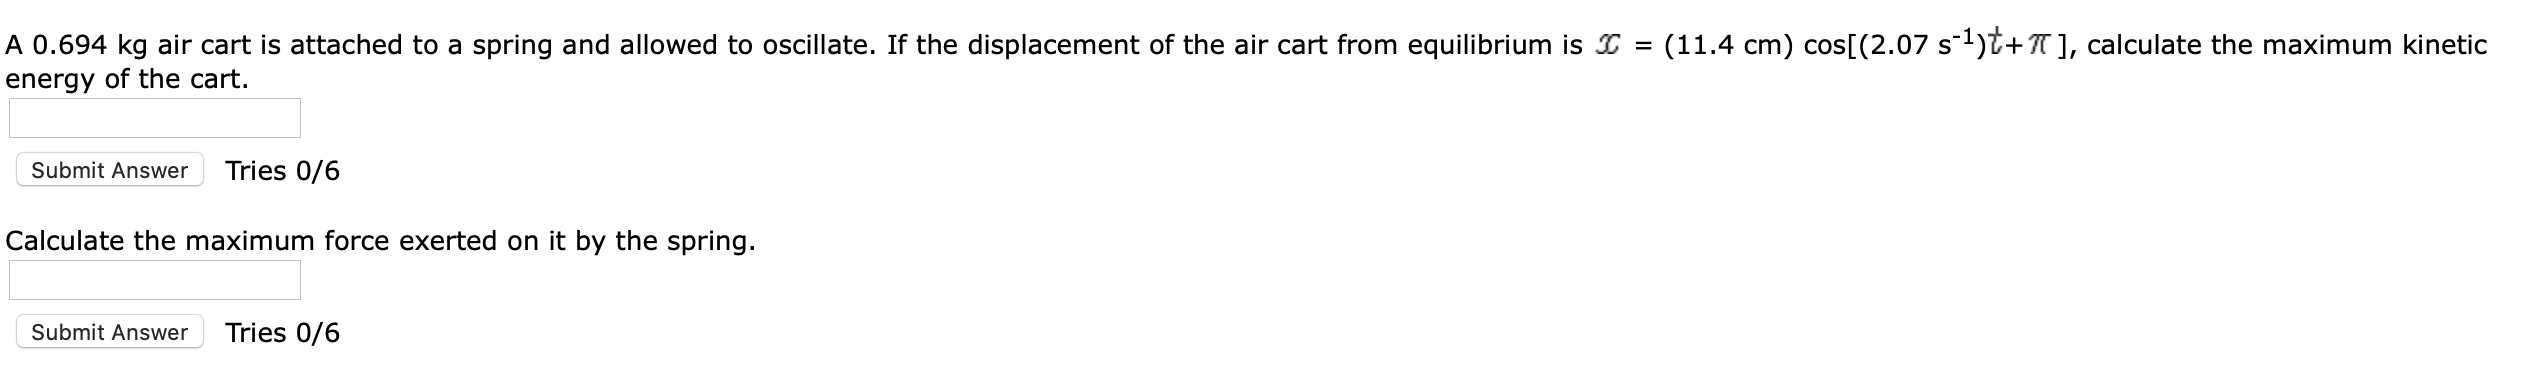 A 0.694 kg air cart is attached to a spring and allowed to oscillate. If the displacement of the air cart from equilibrium is
energy of the cart
(11.4 cm) cos[ (2.07 s1)^+], calculate the maximum kinetic
=
Tries 0/6
Submit Answer
Calculate the maximum force exerted on it by the spring.
Tries 0/6
Submit Answer
